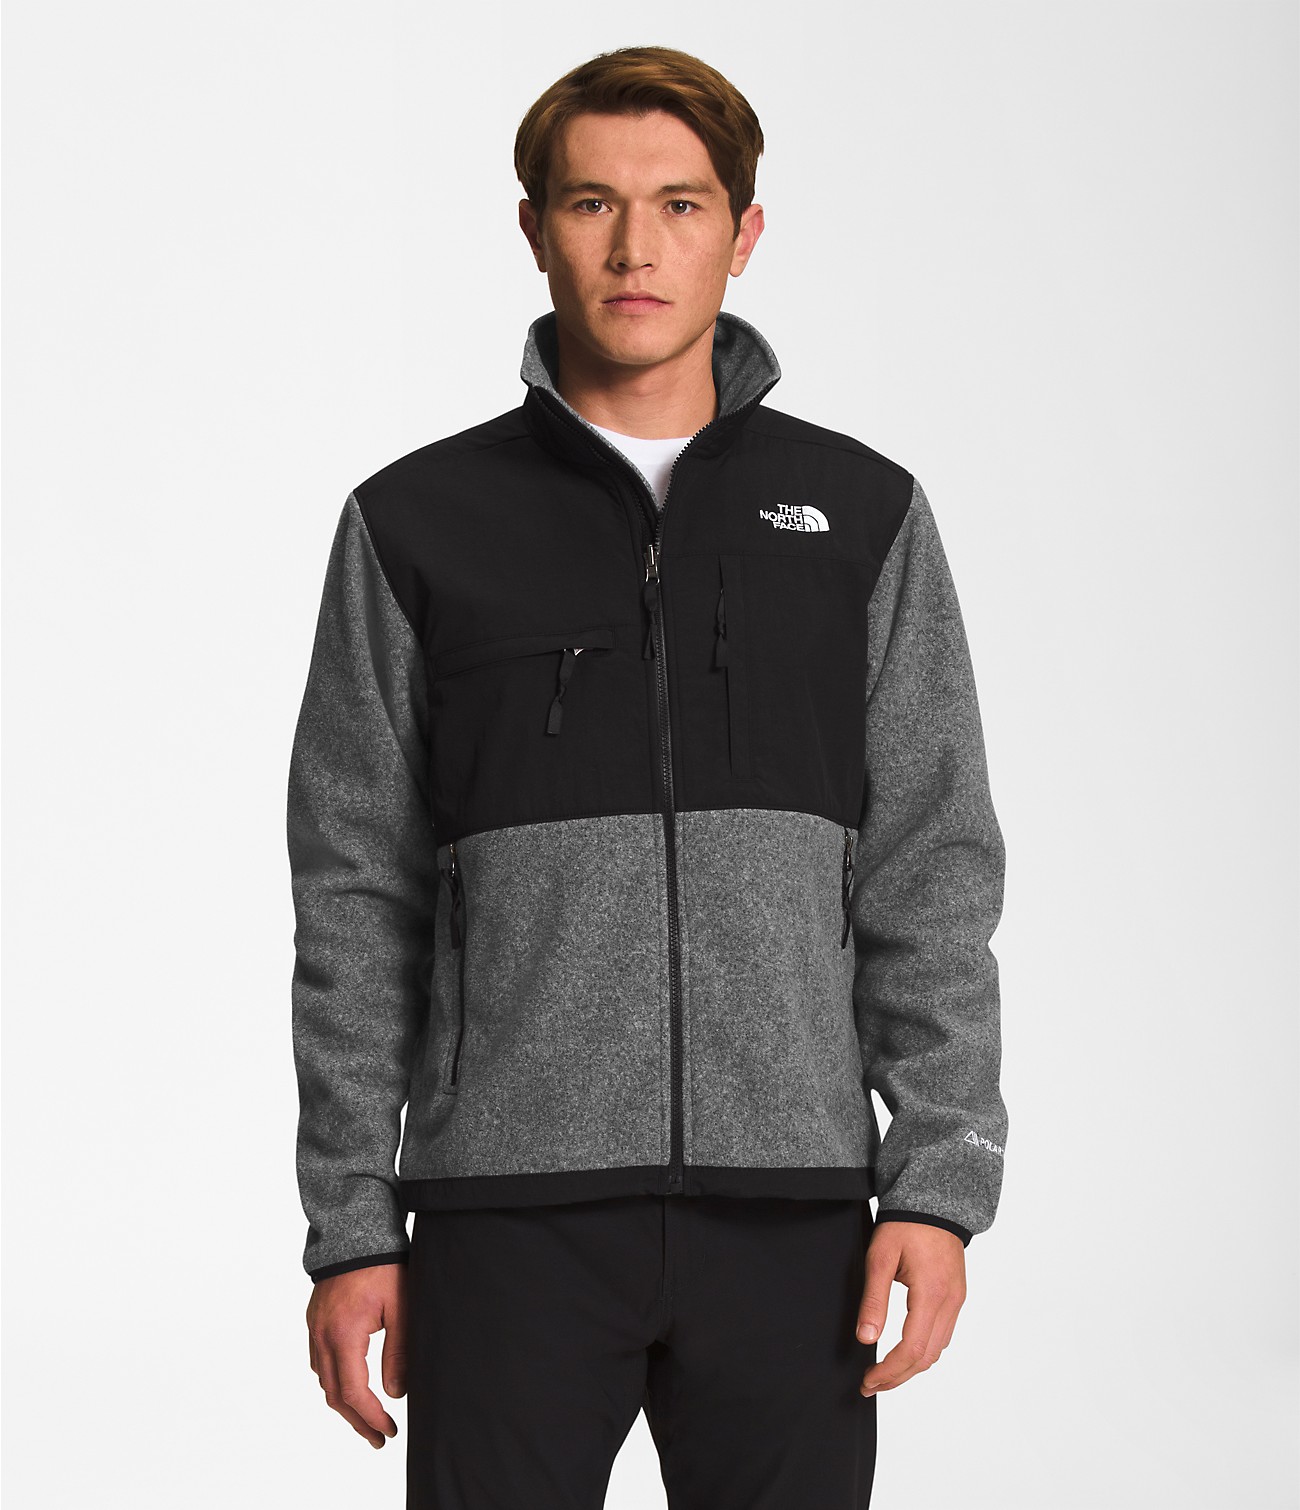 Unlock Wilderness' choice in the Nike Vs North Face comparison, the Denali Jacket by The North Face